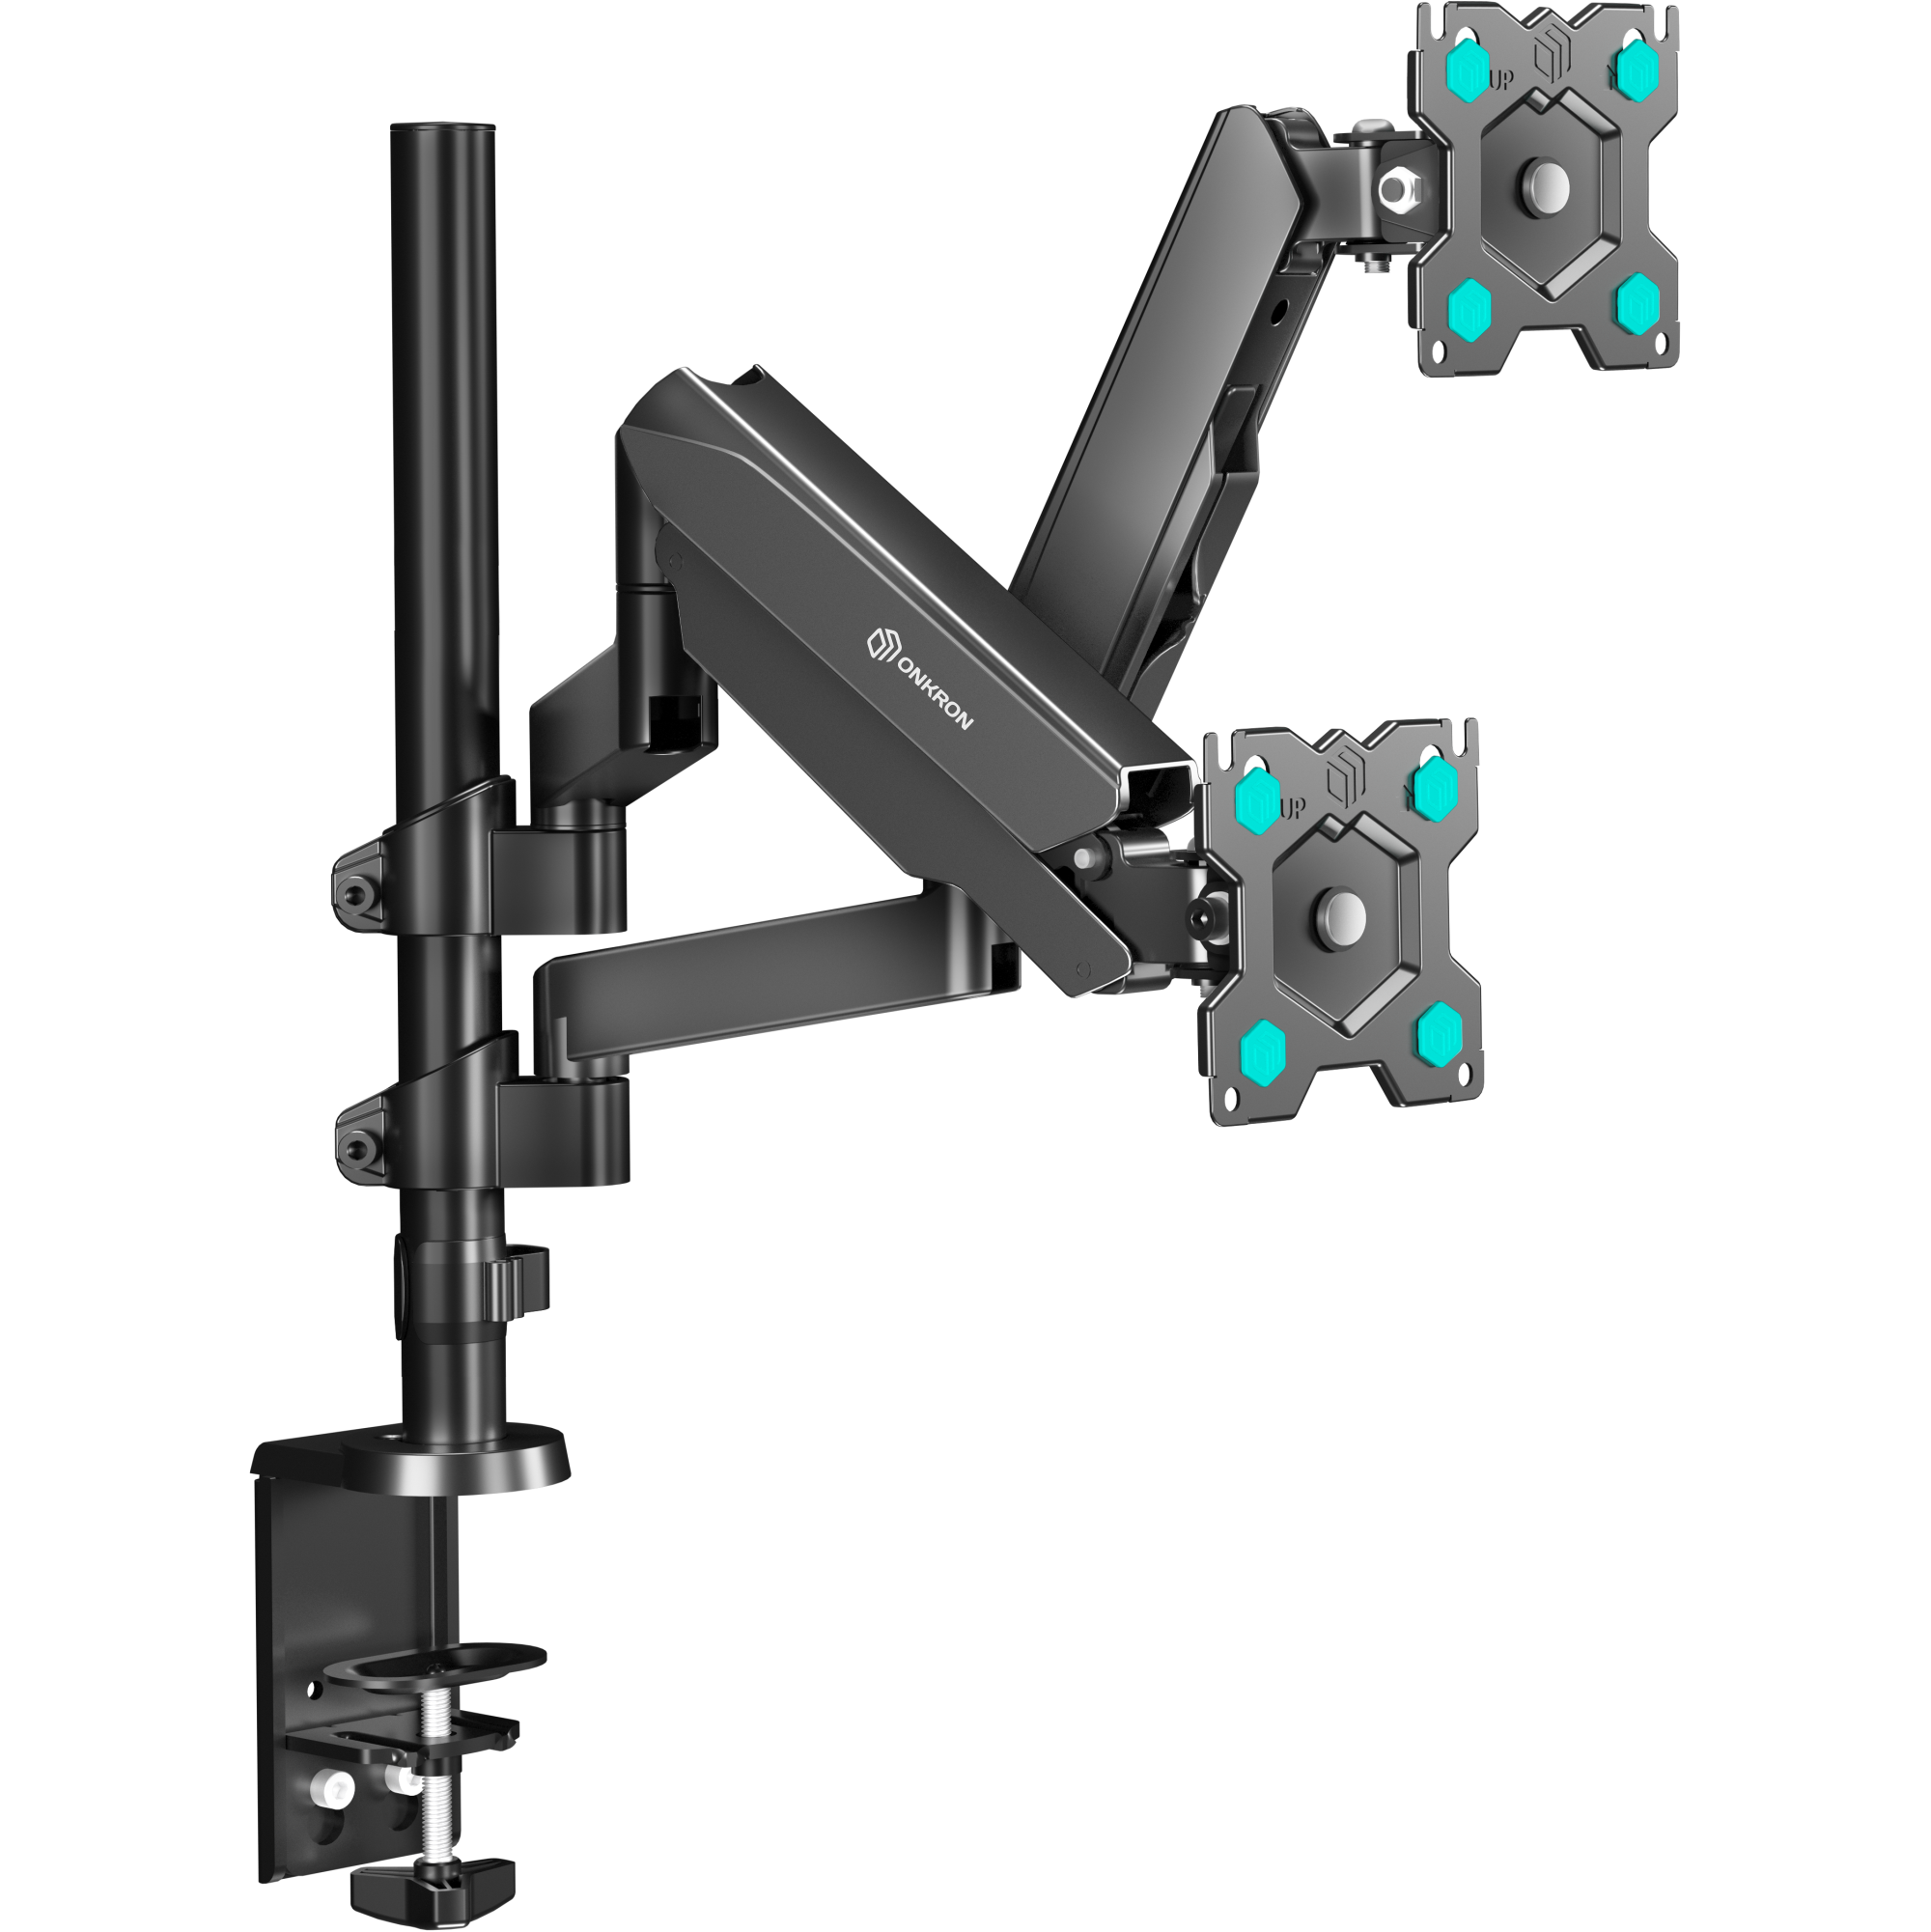 Dual Monitor Arm Desk Mount for 13”-32" Screens up to 17.6 lb. ONKRON G140, Black